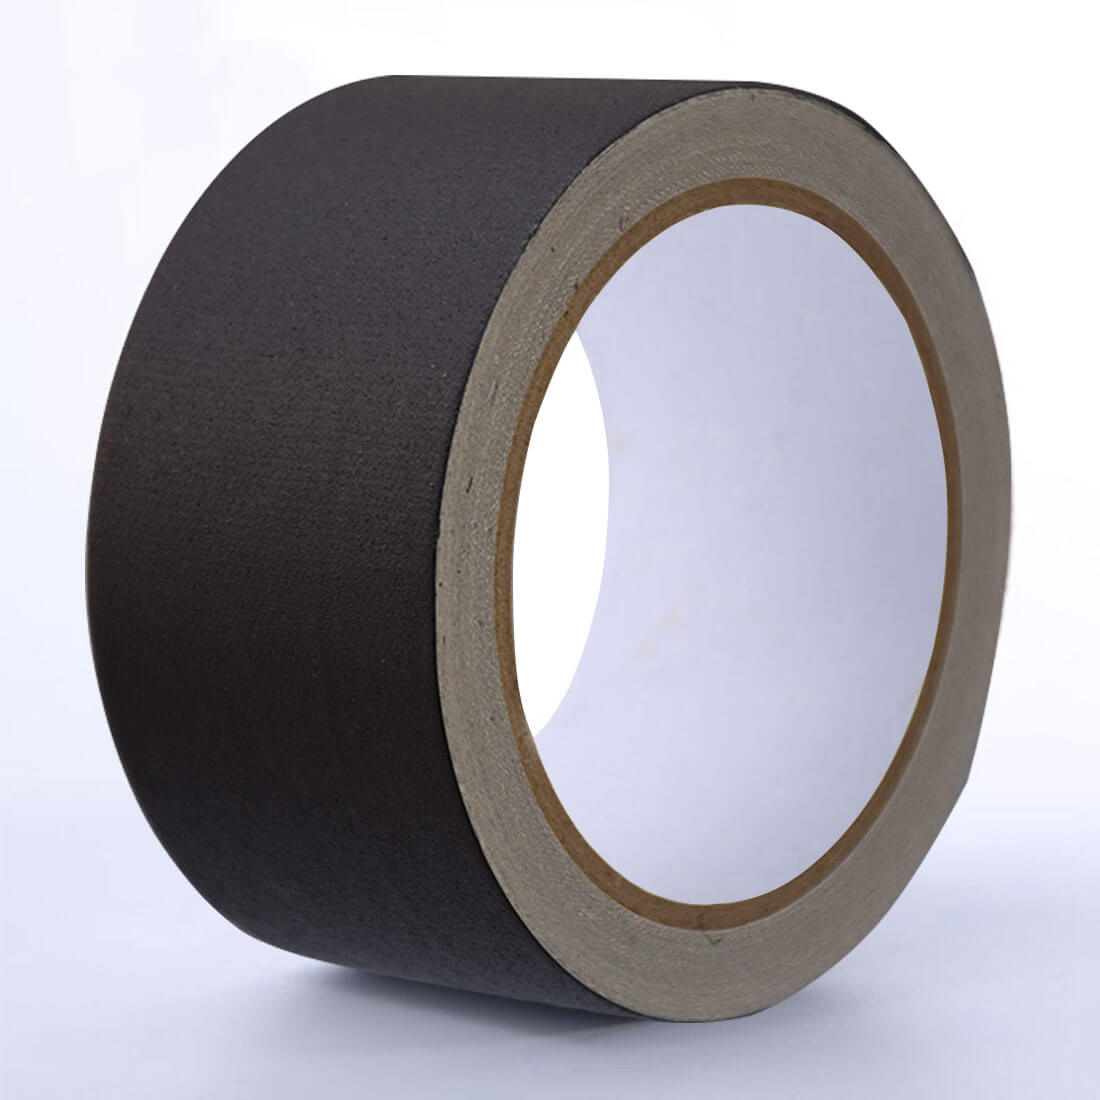 /product/strong-adhesive-gaffer-tape.html